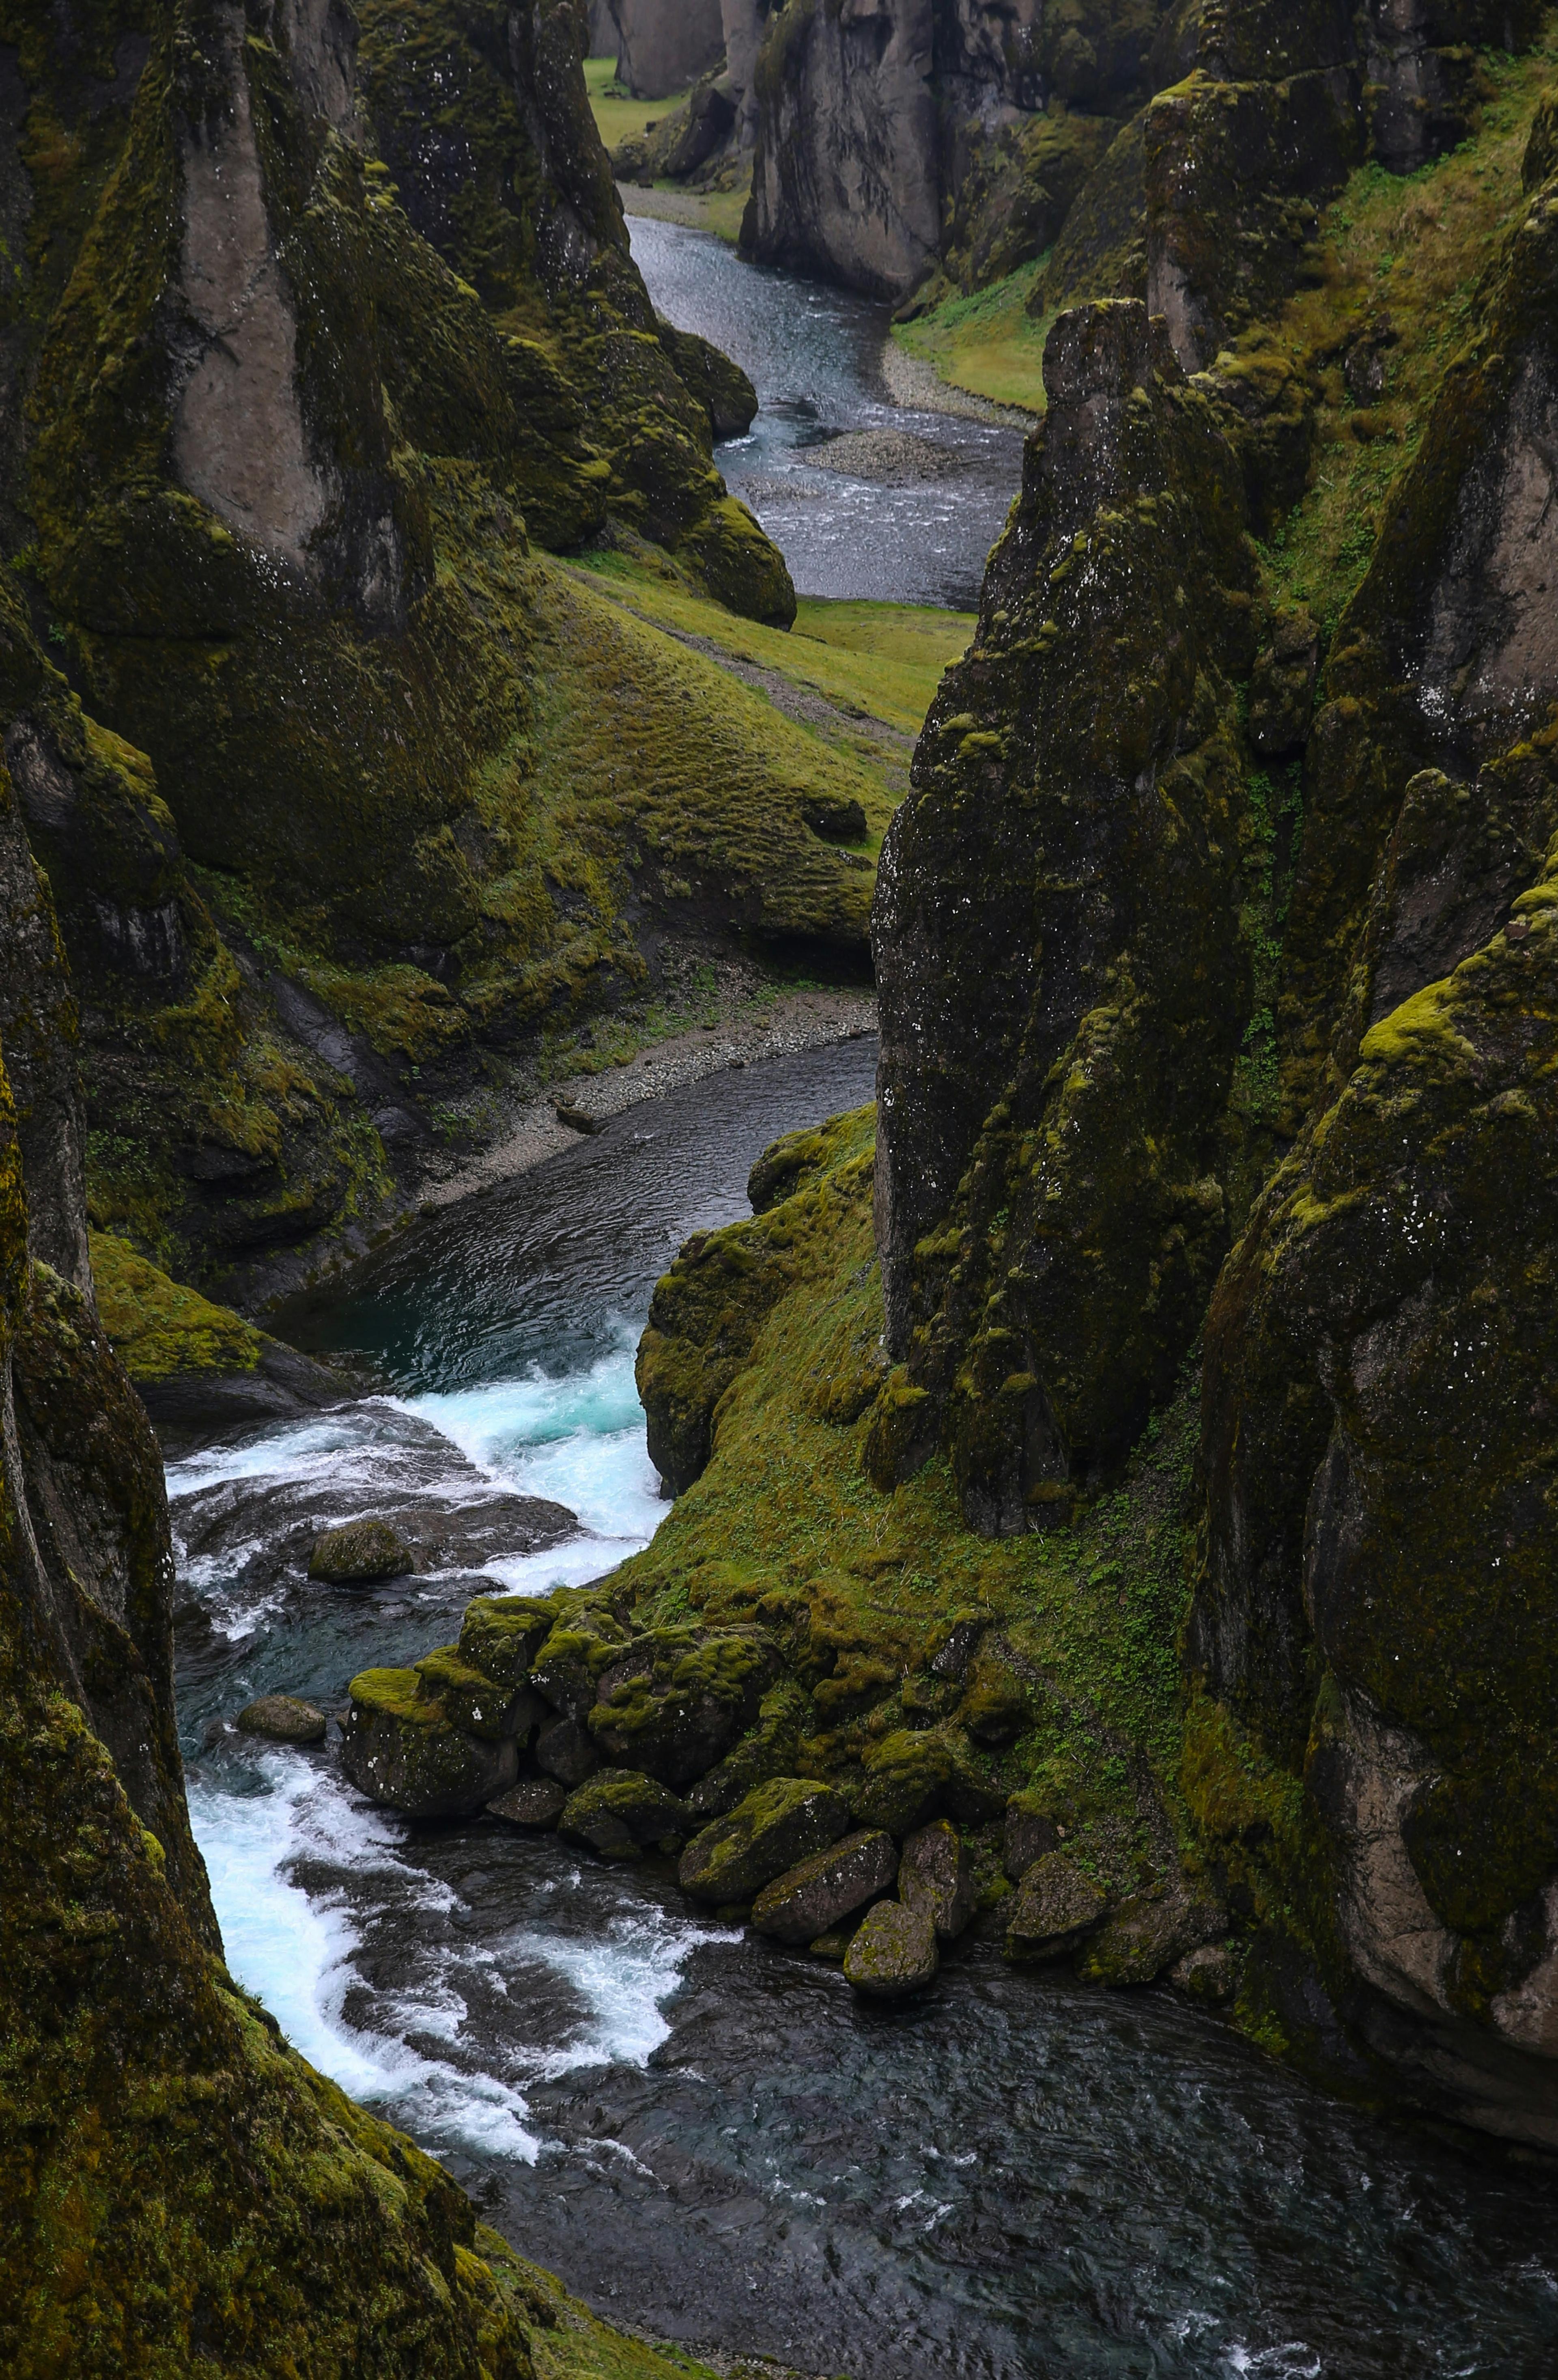 A rugged canyon with a winding river below, casting shadows and highlights on the mossy cliffs.